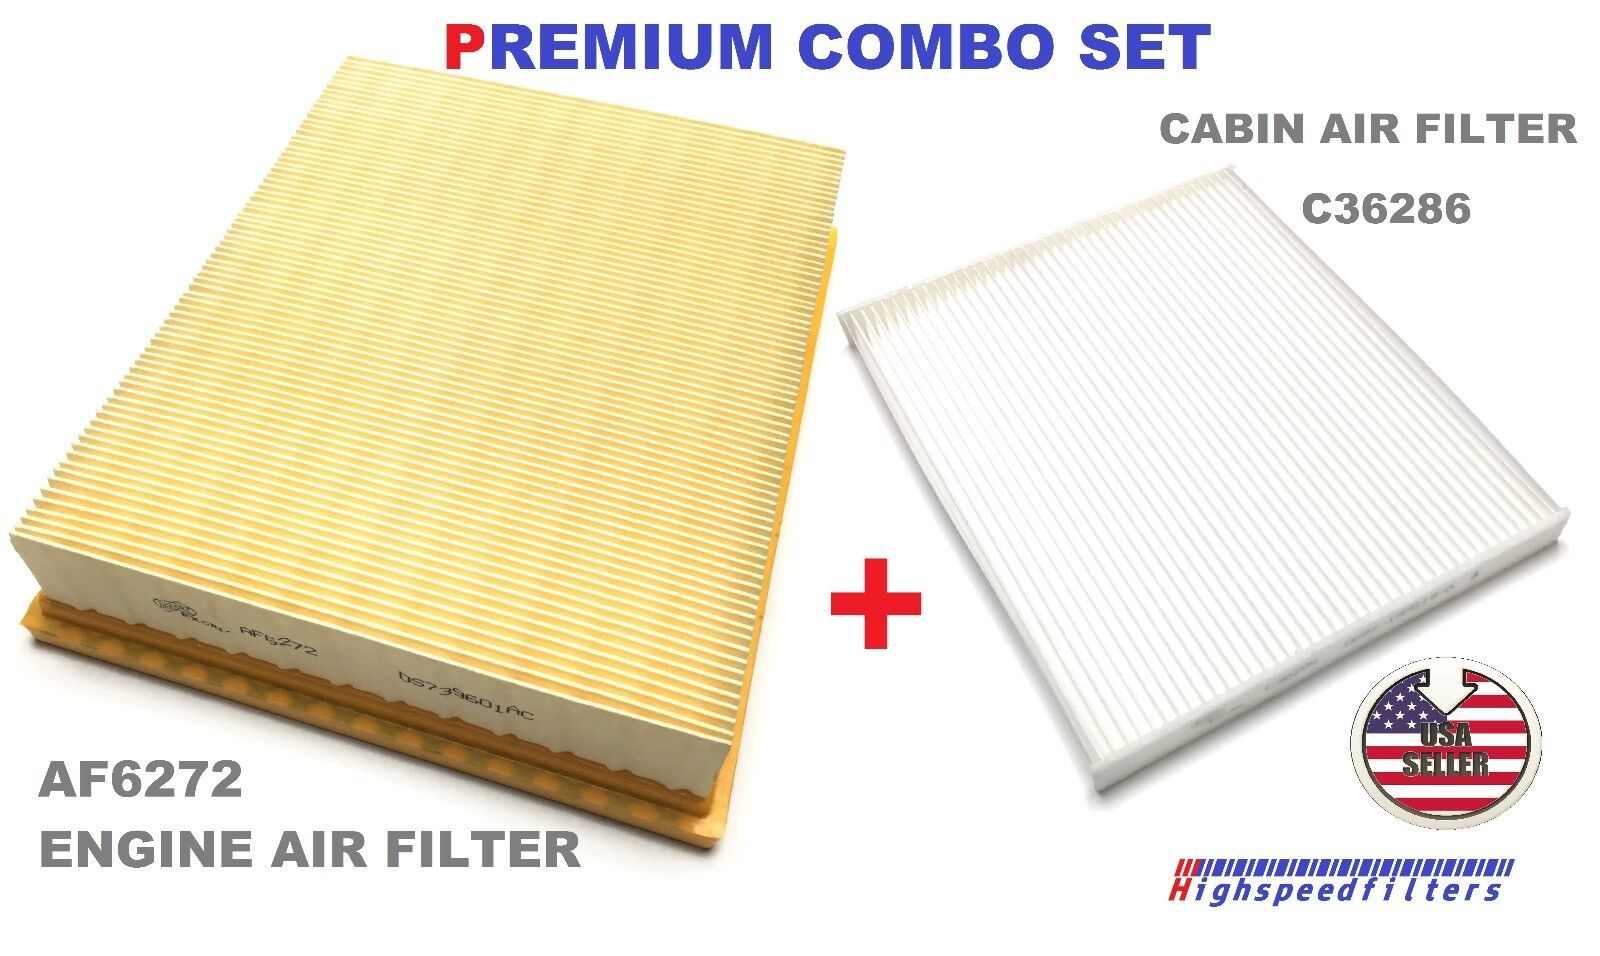 PREMIUM COMBO Air Filter + Cabin Filter for NEW MKX MKZ Continental EDGE Fusion